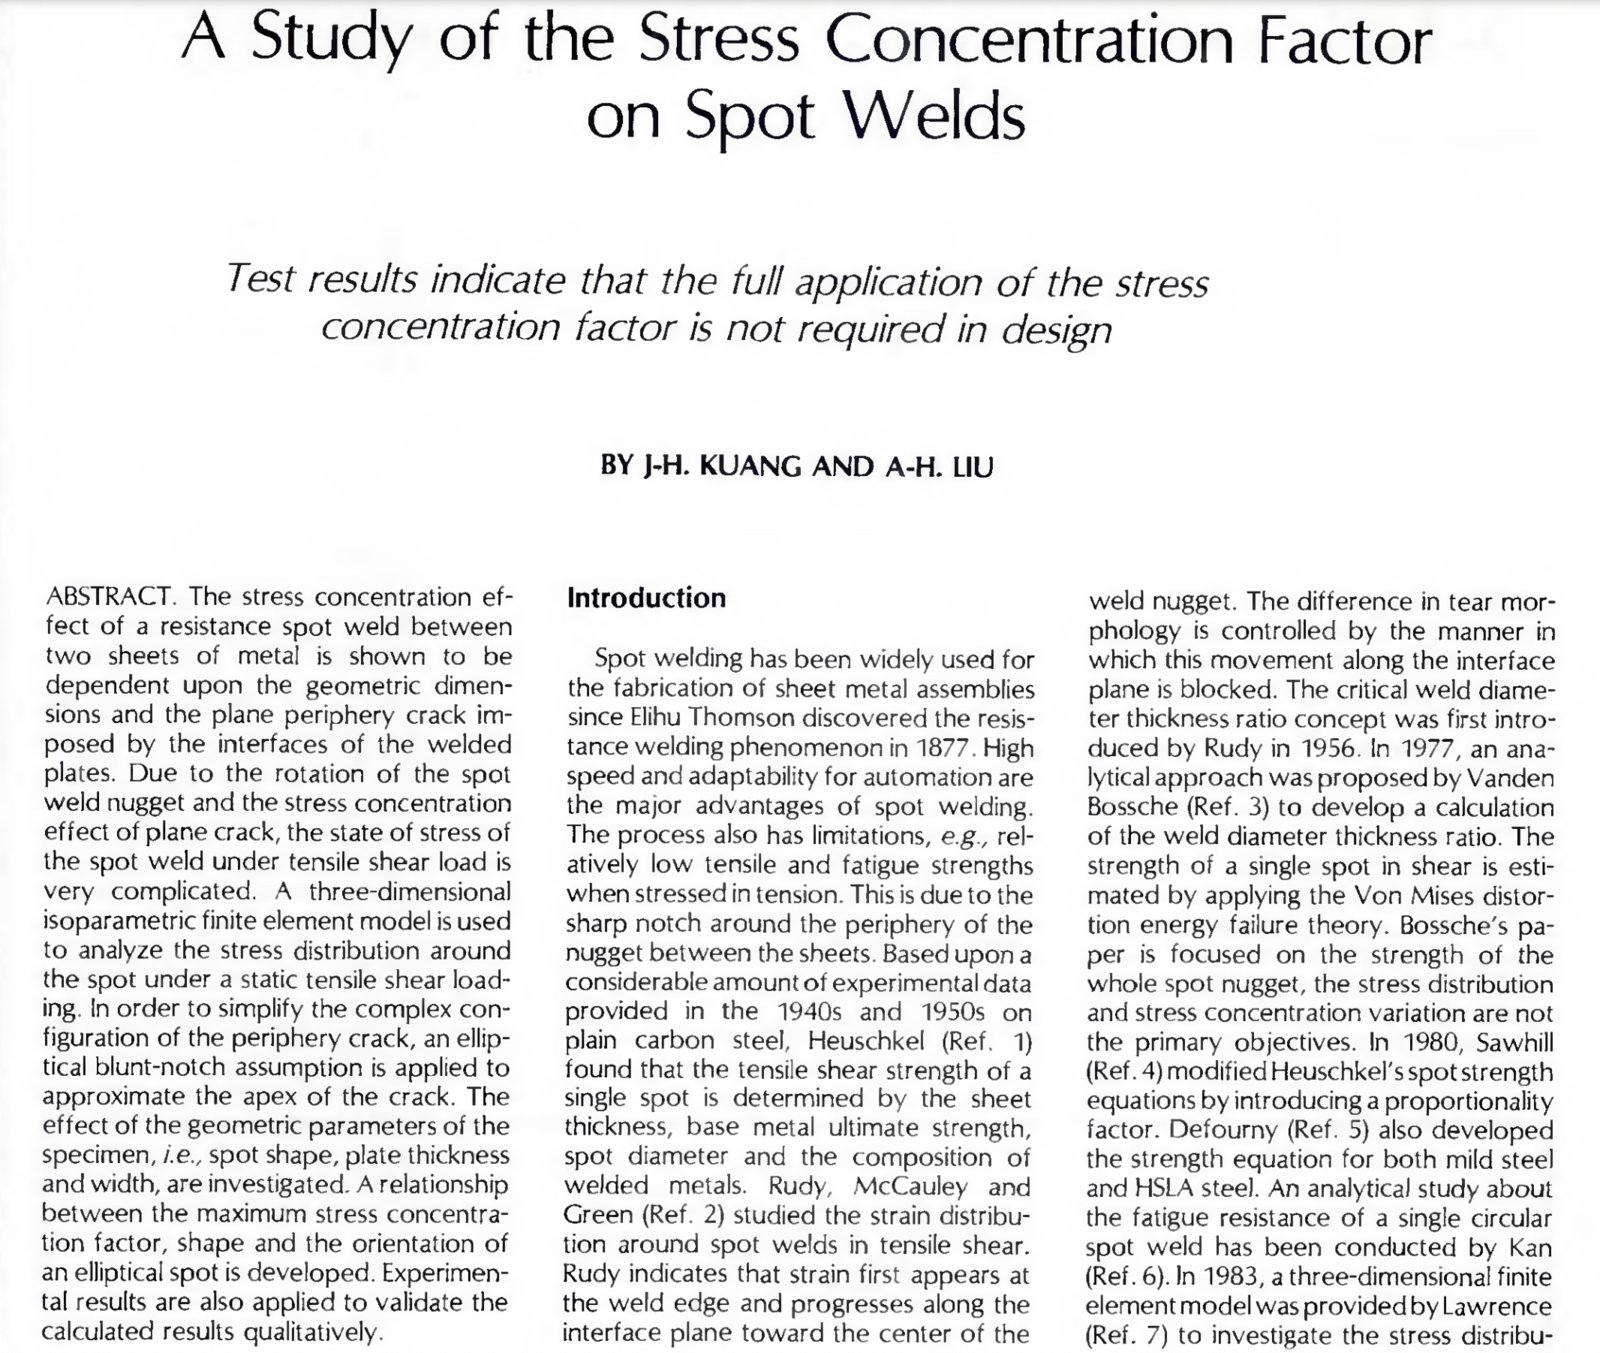 A study of the stress concentration factor on spot welds.jpg